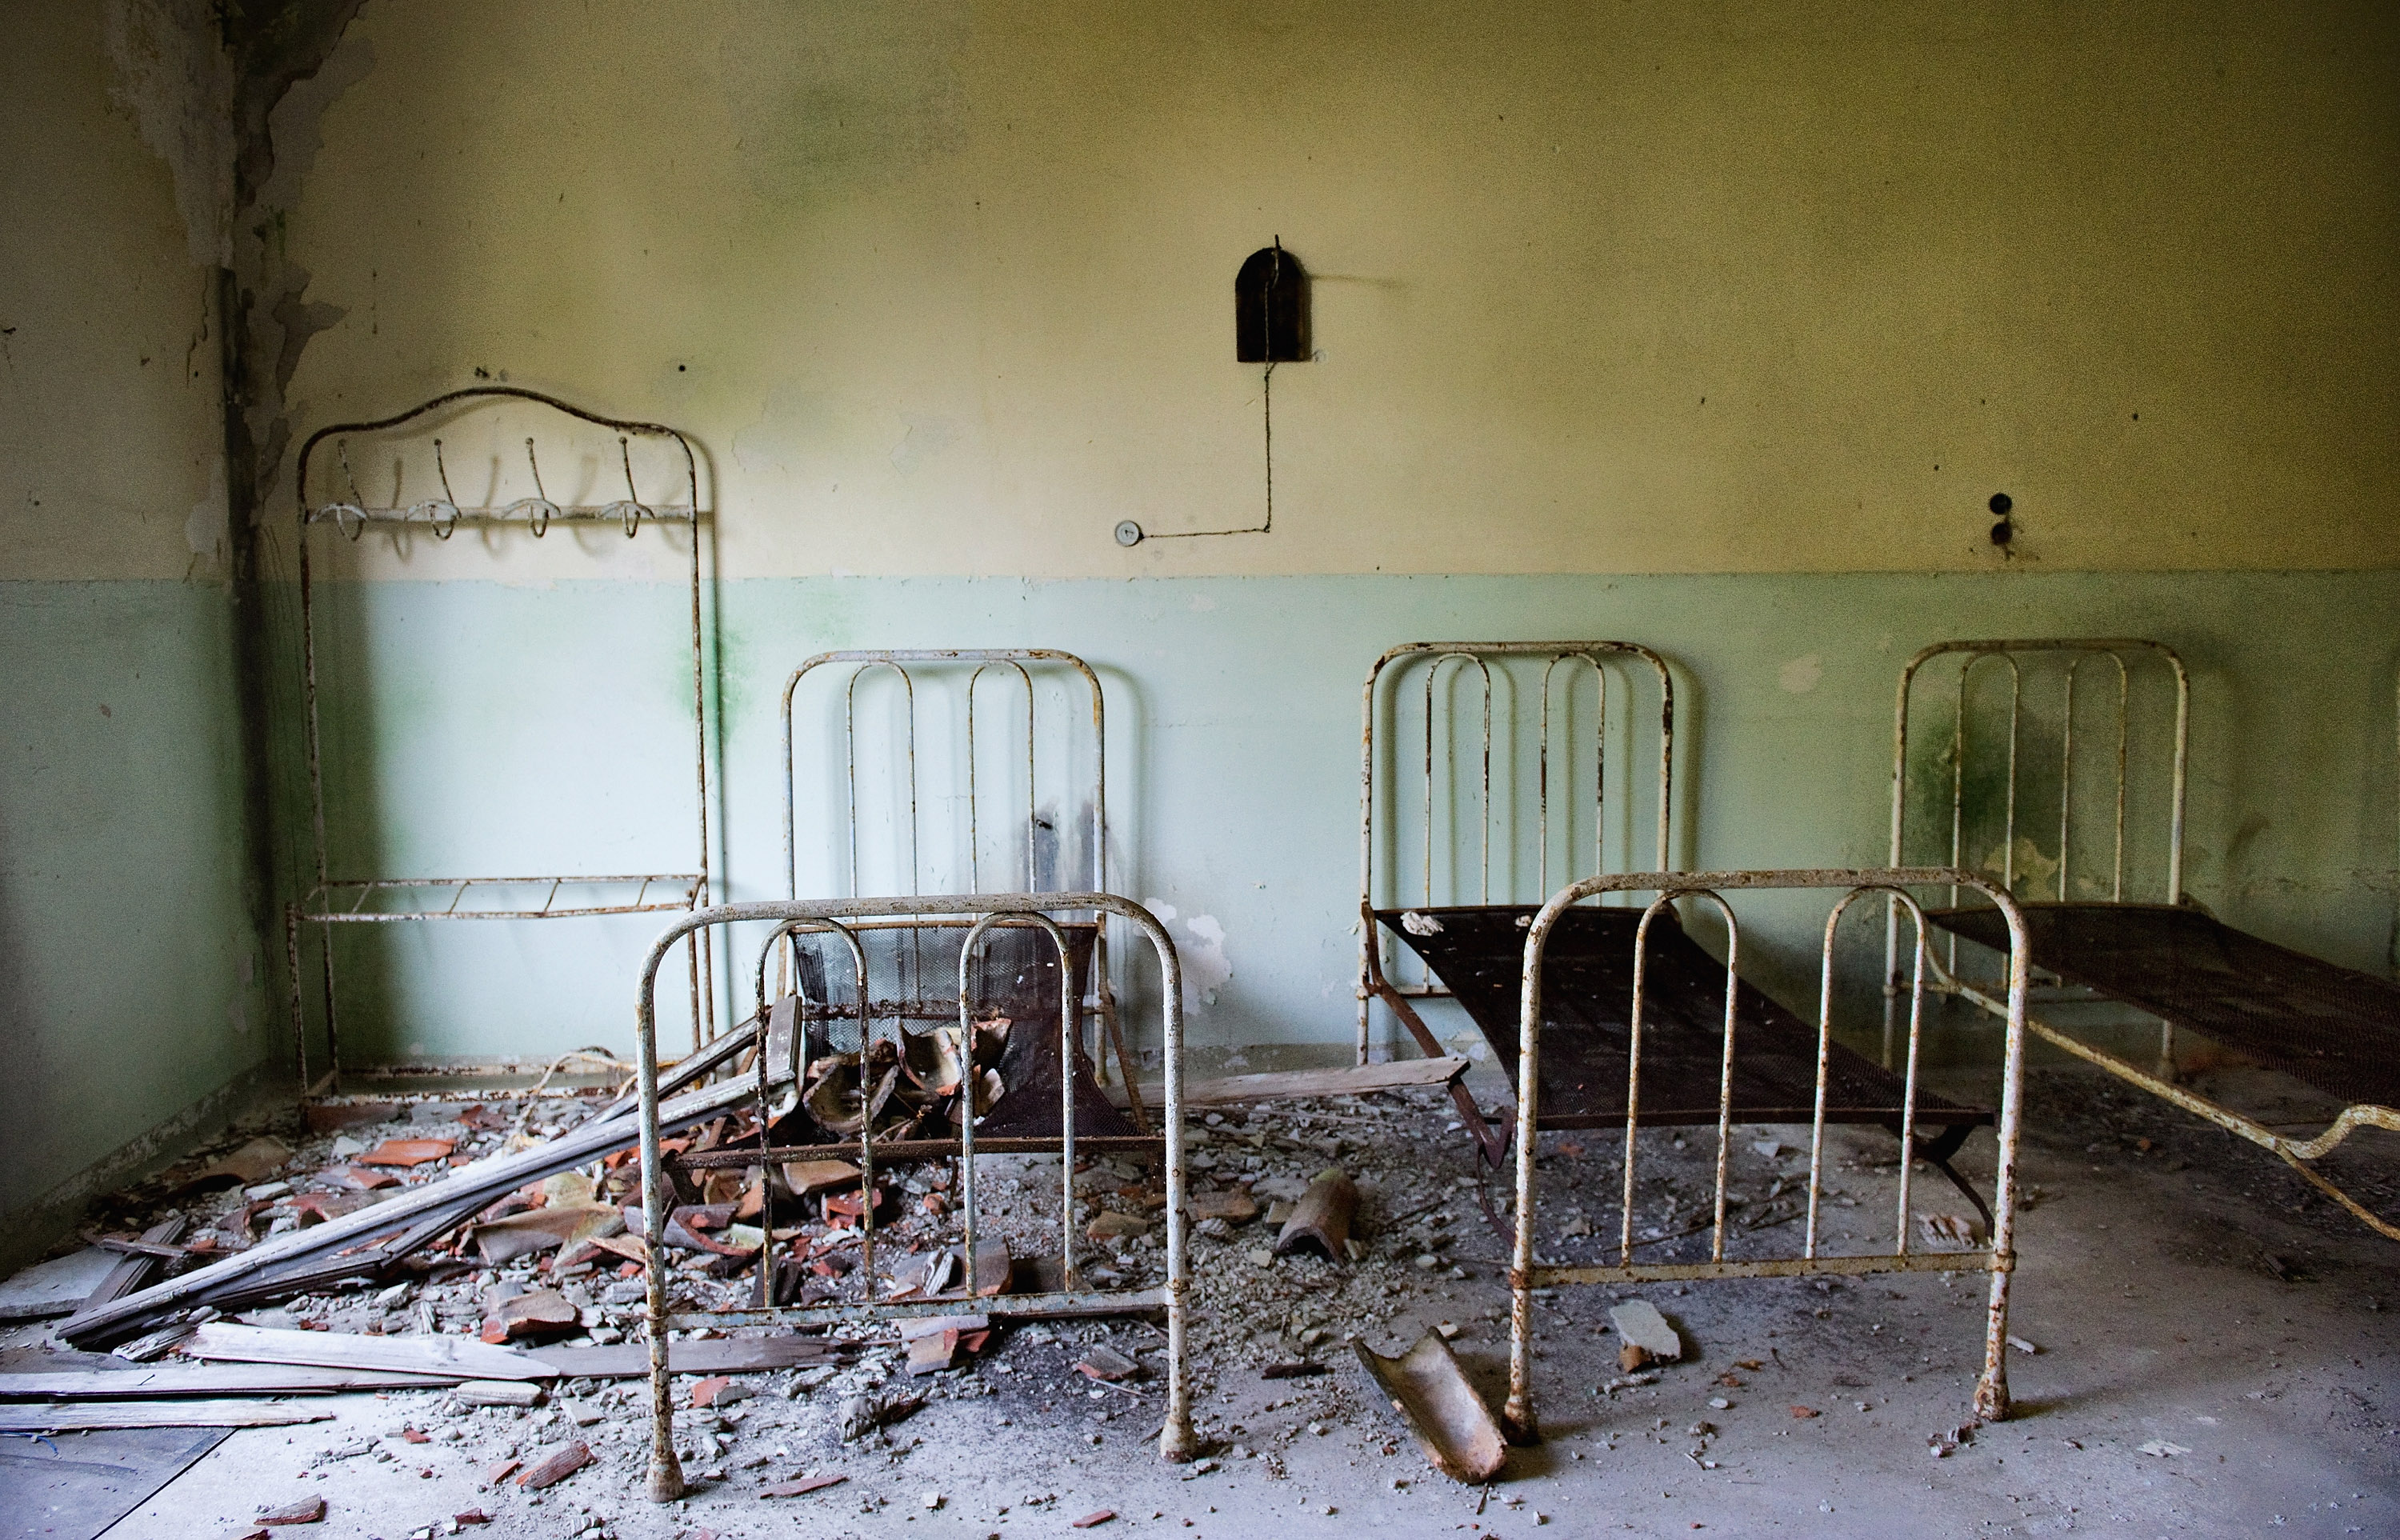 VENICE, ITALY - AUGUST 27:   Beds and furniture remain in one of the dormitories in the psychiatric ward of the abandoned Hospital of Poveglia on August 27, 2011 in Venice, Italy. The island of Poveglia, with its ruined hospital and plague burial grounds, is said to be the most haunted location in the world. The area is located within a multi-million dollar piece of real estate but is deserted and off limits to the public. The dark and derelict forbidding shores are only minutes away from the glamour of the Venice Film Festival on the Lido.  (Photo by Marco Secchi/Getty Images) (Marco Secchi—Getty Images)